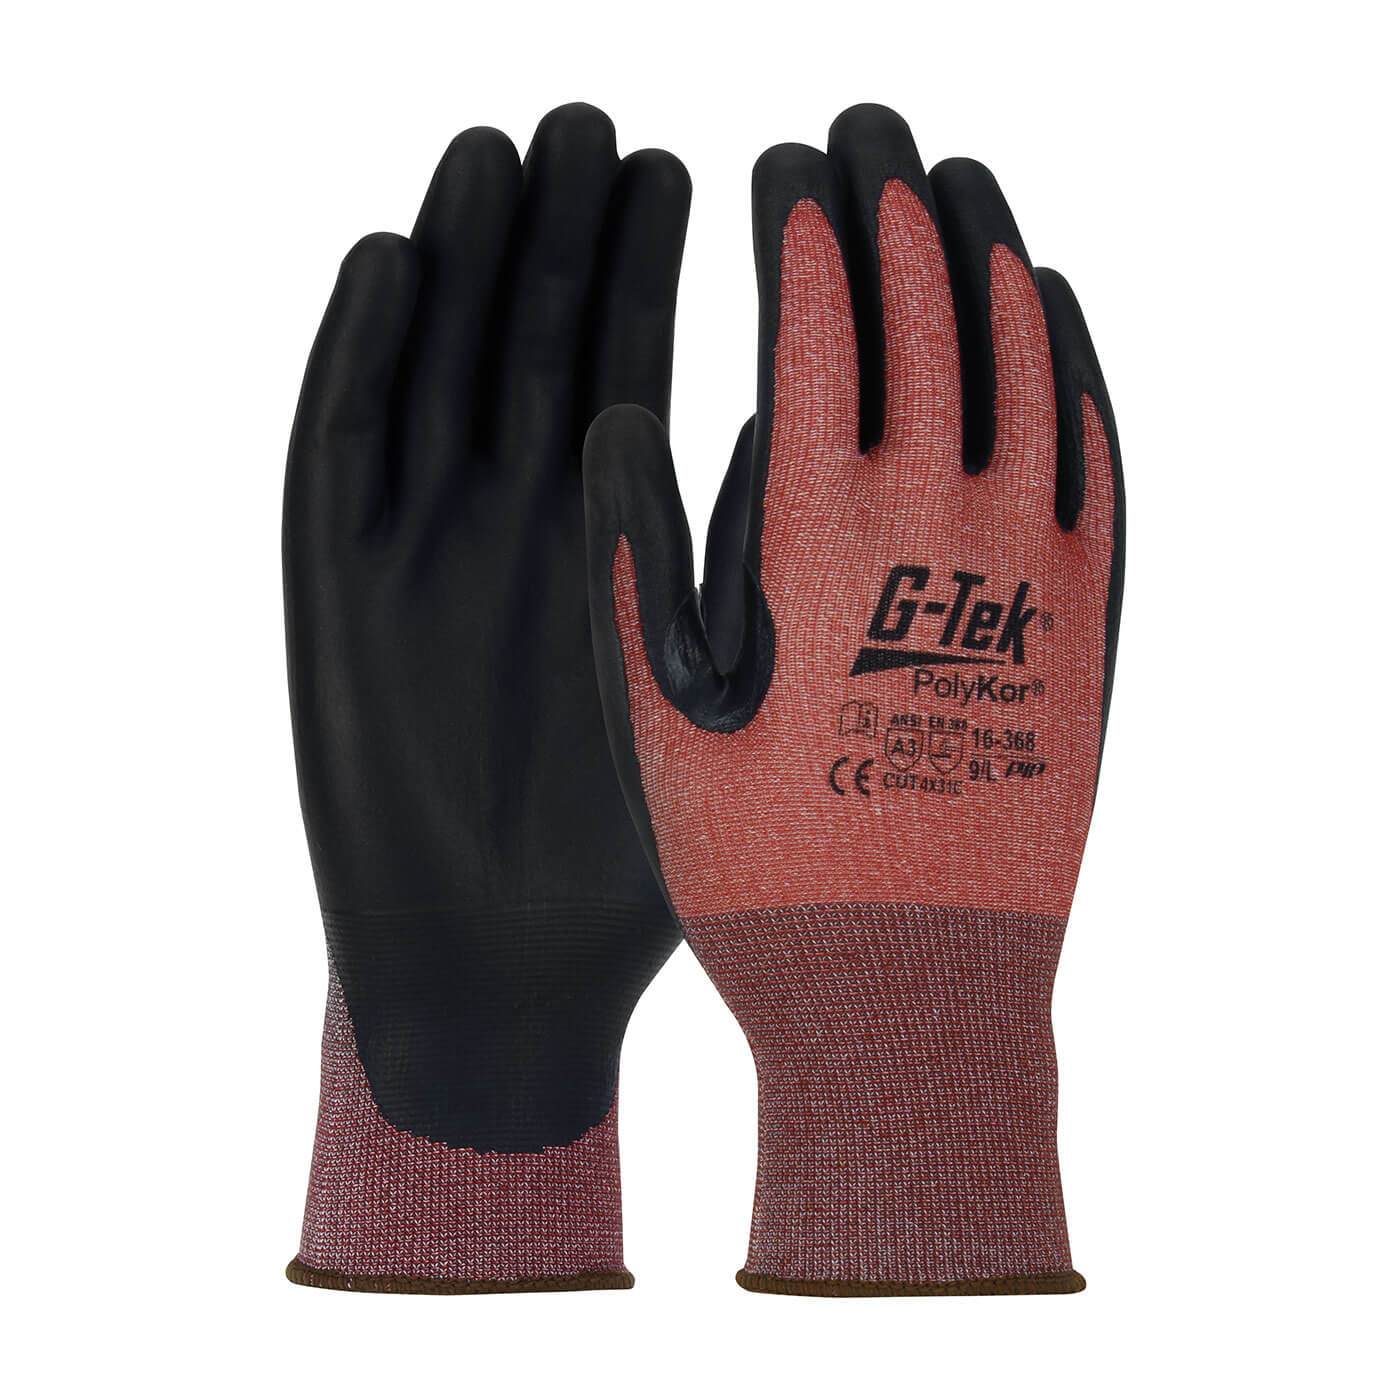 Cut Resistant Gloves with Touch Screen Capability